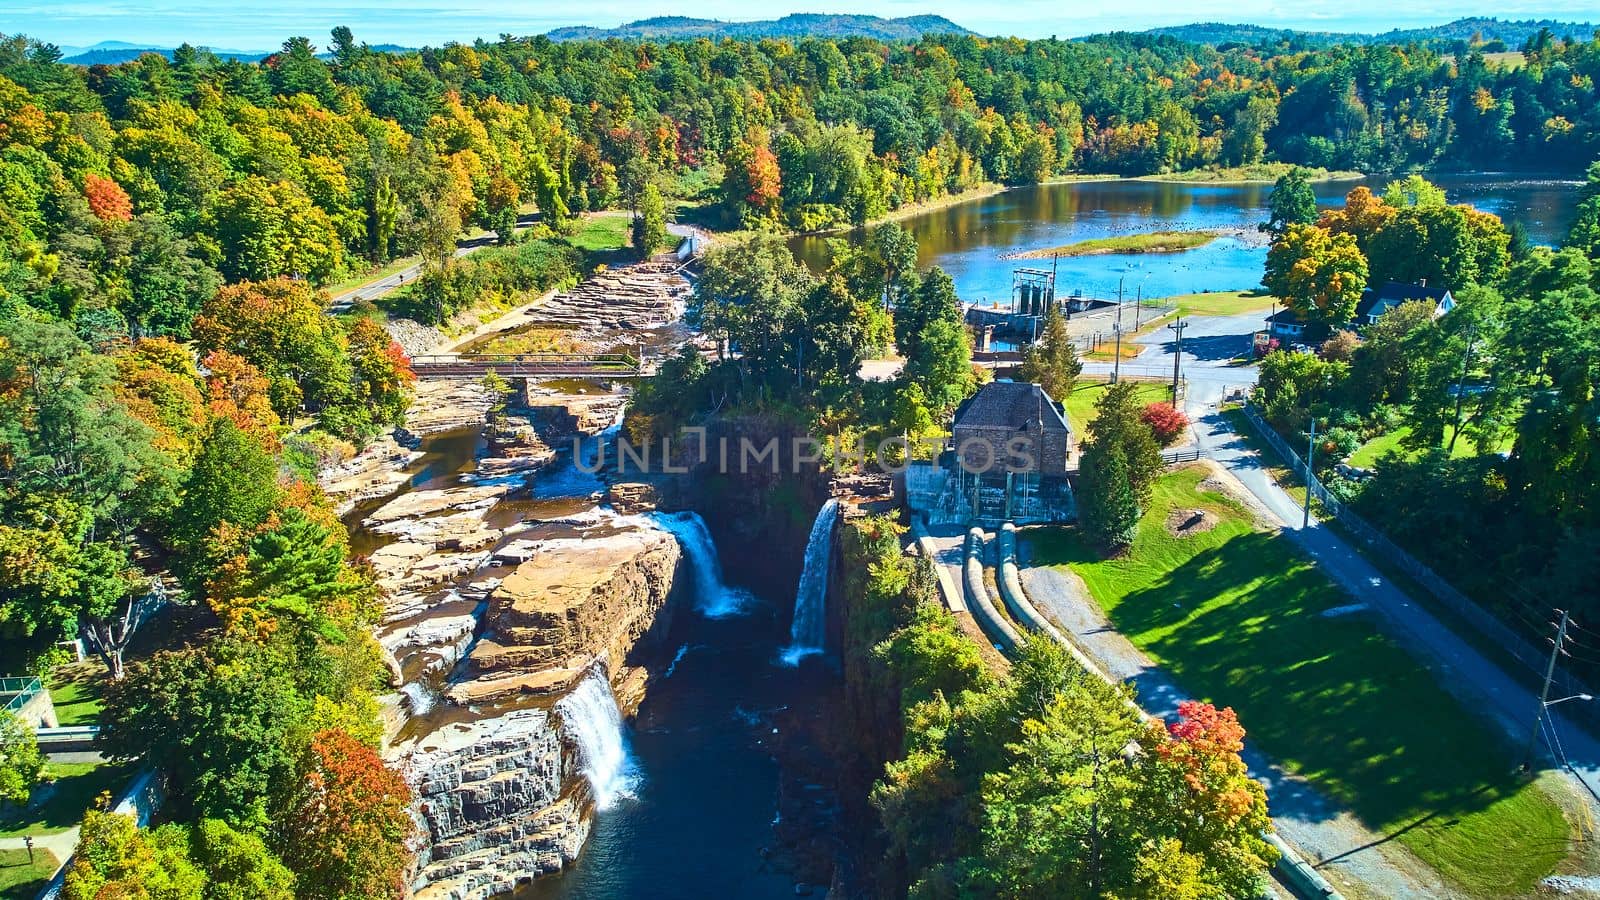 Image of Large canyon with many waterfalls, Hydroelectric power plant, and nearby lake from drone